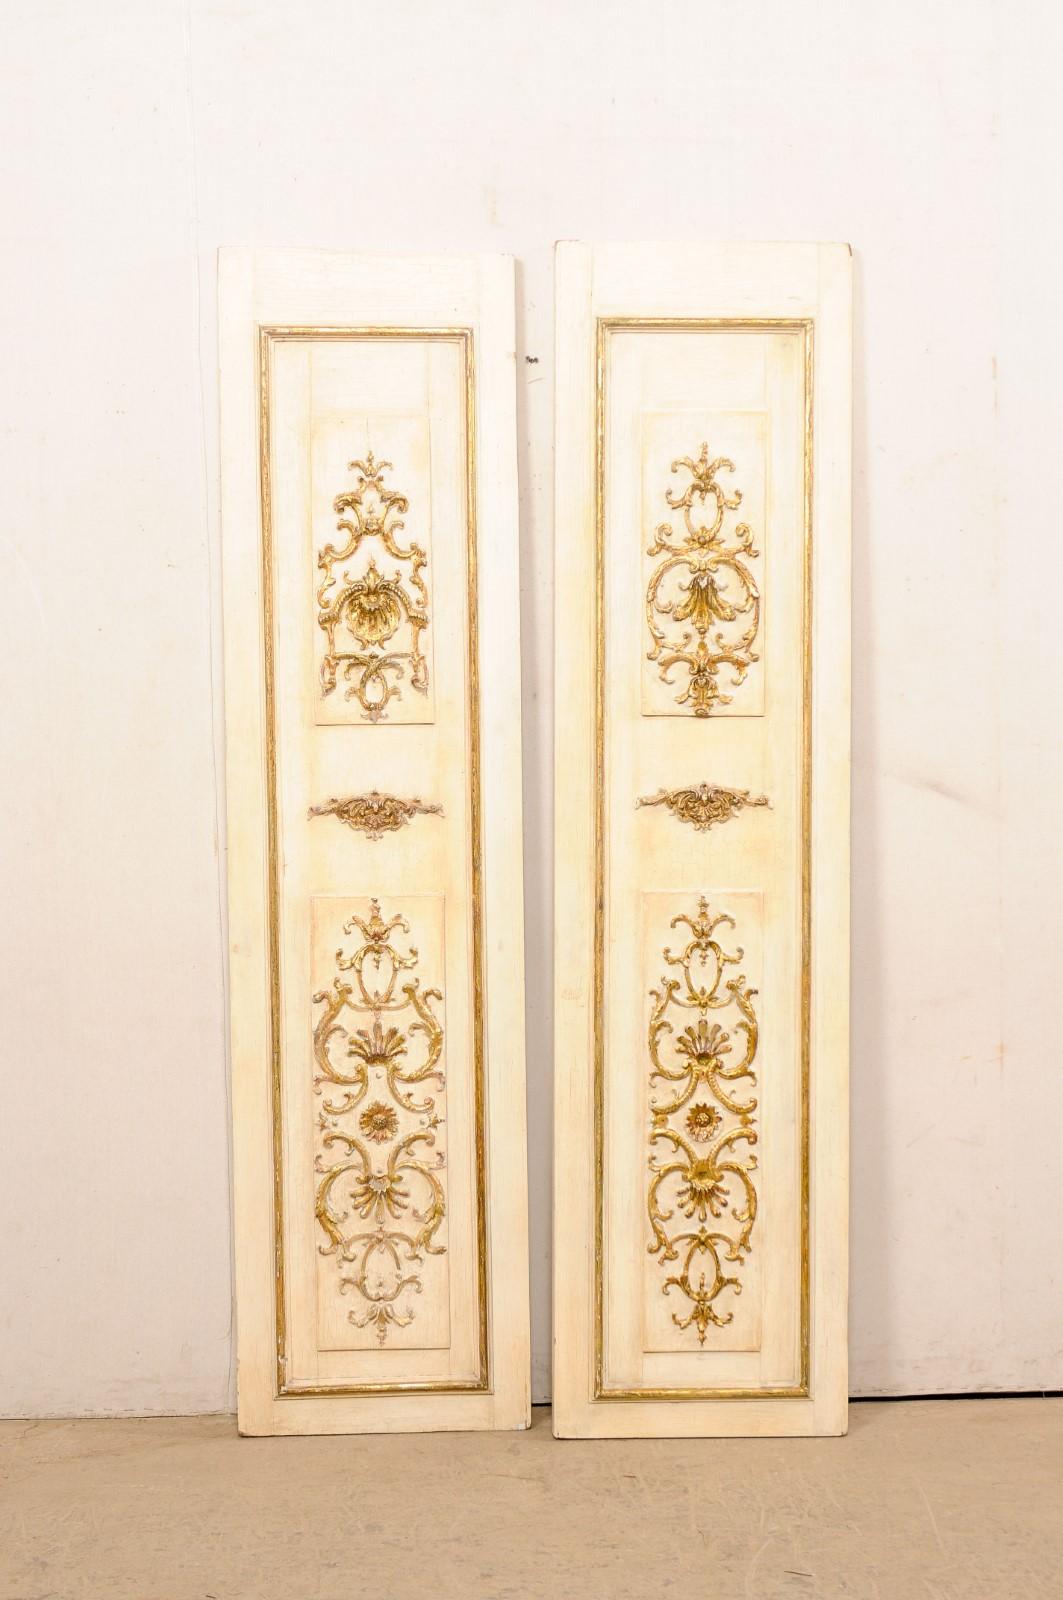 French pair of decorative wall panels with gilt carved accents. This pair of wall ornaments from France are comprised of both vintage and older elements, with a height over over 6.75 feet in height. Each piece has a two- panel front that feature